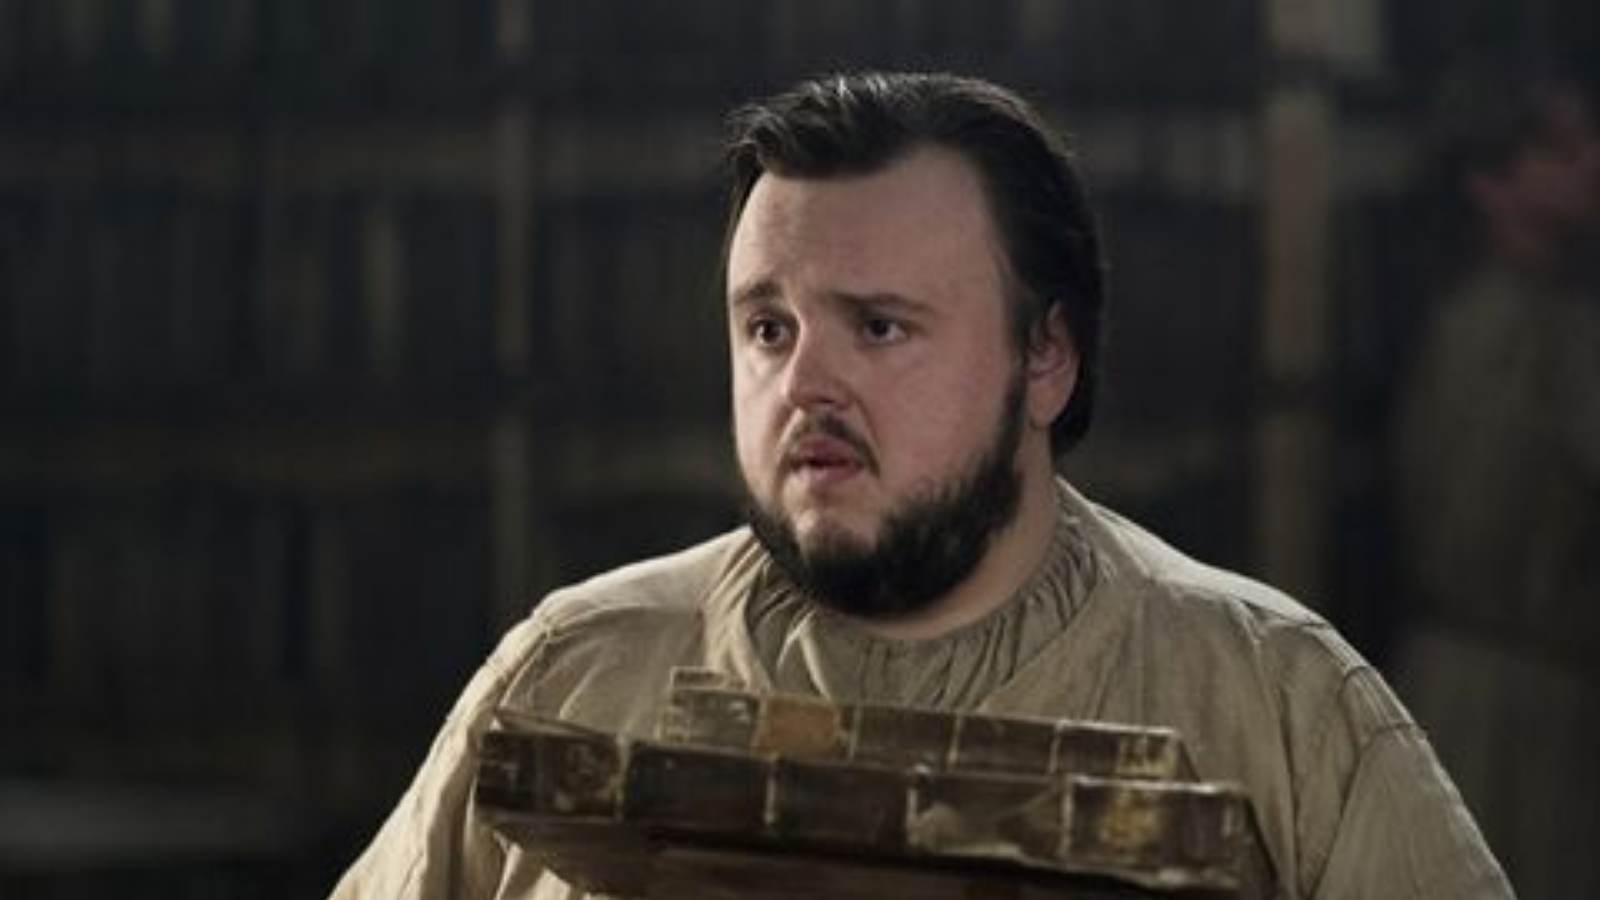 'Game of Thrones' star considering returning or not